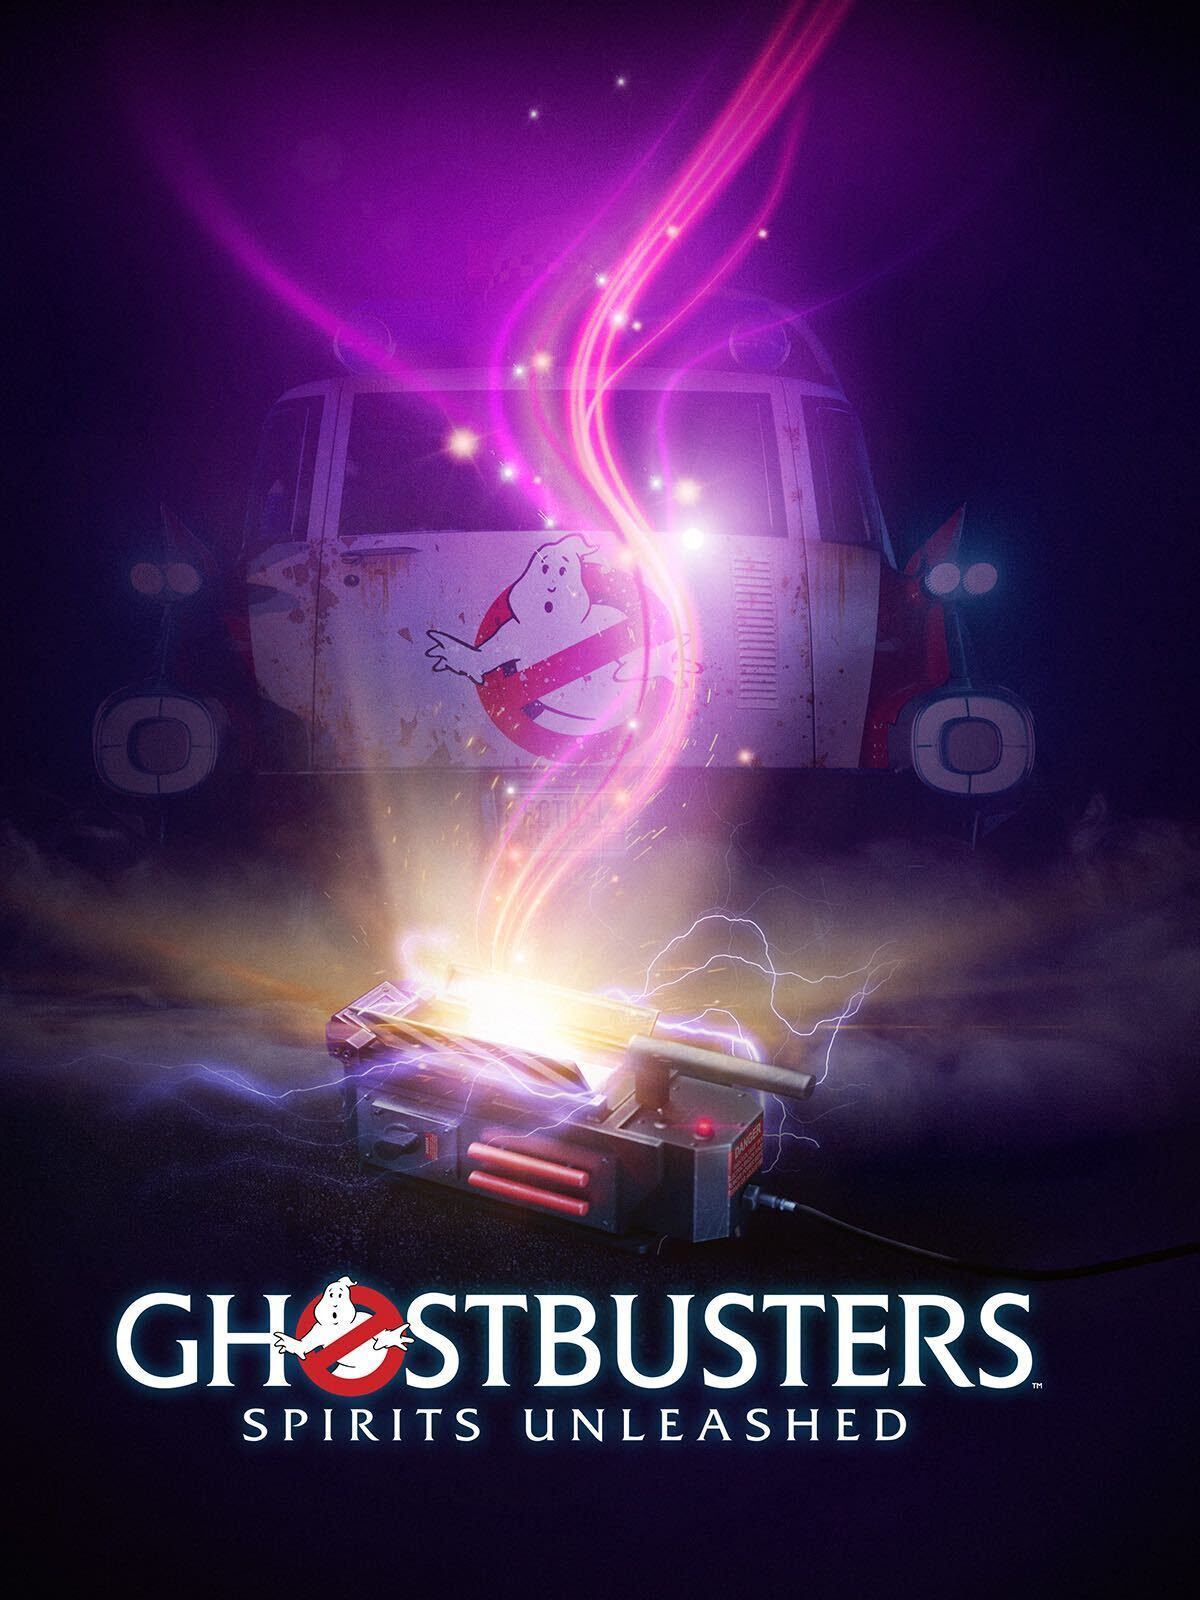 Ghostbusters Spirits Unleashed Brings Ghosts Vs. Busters Online This